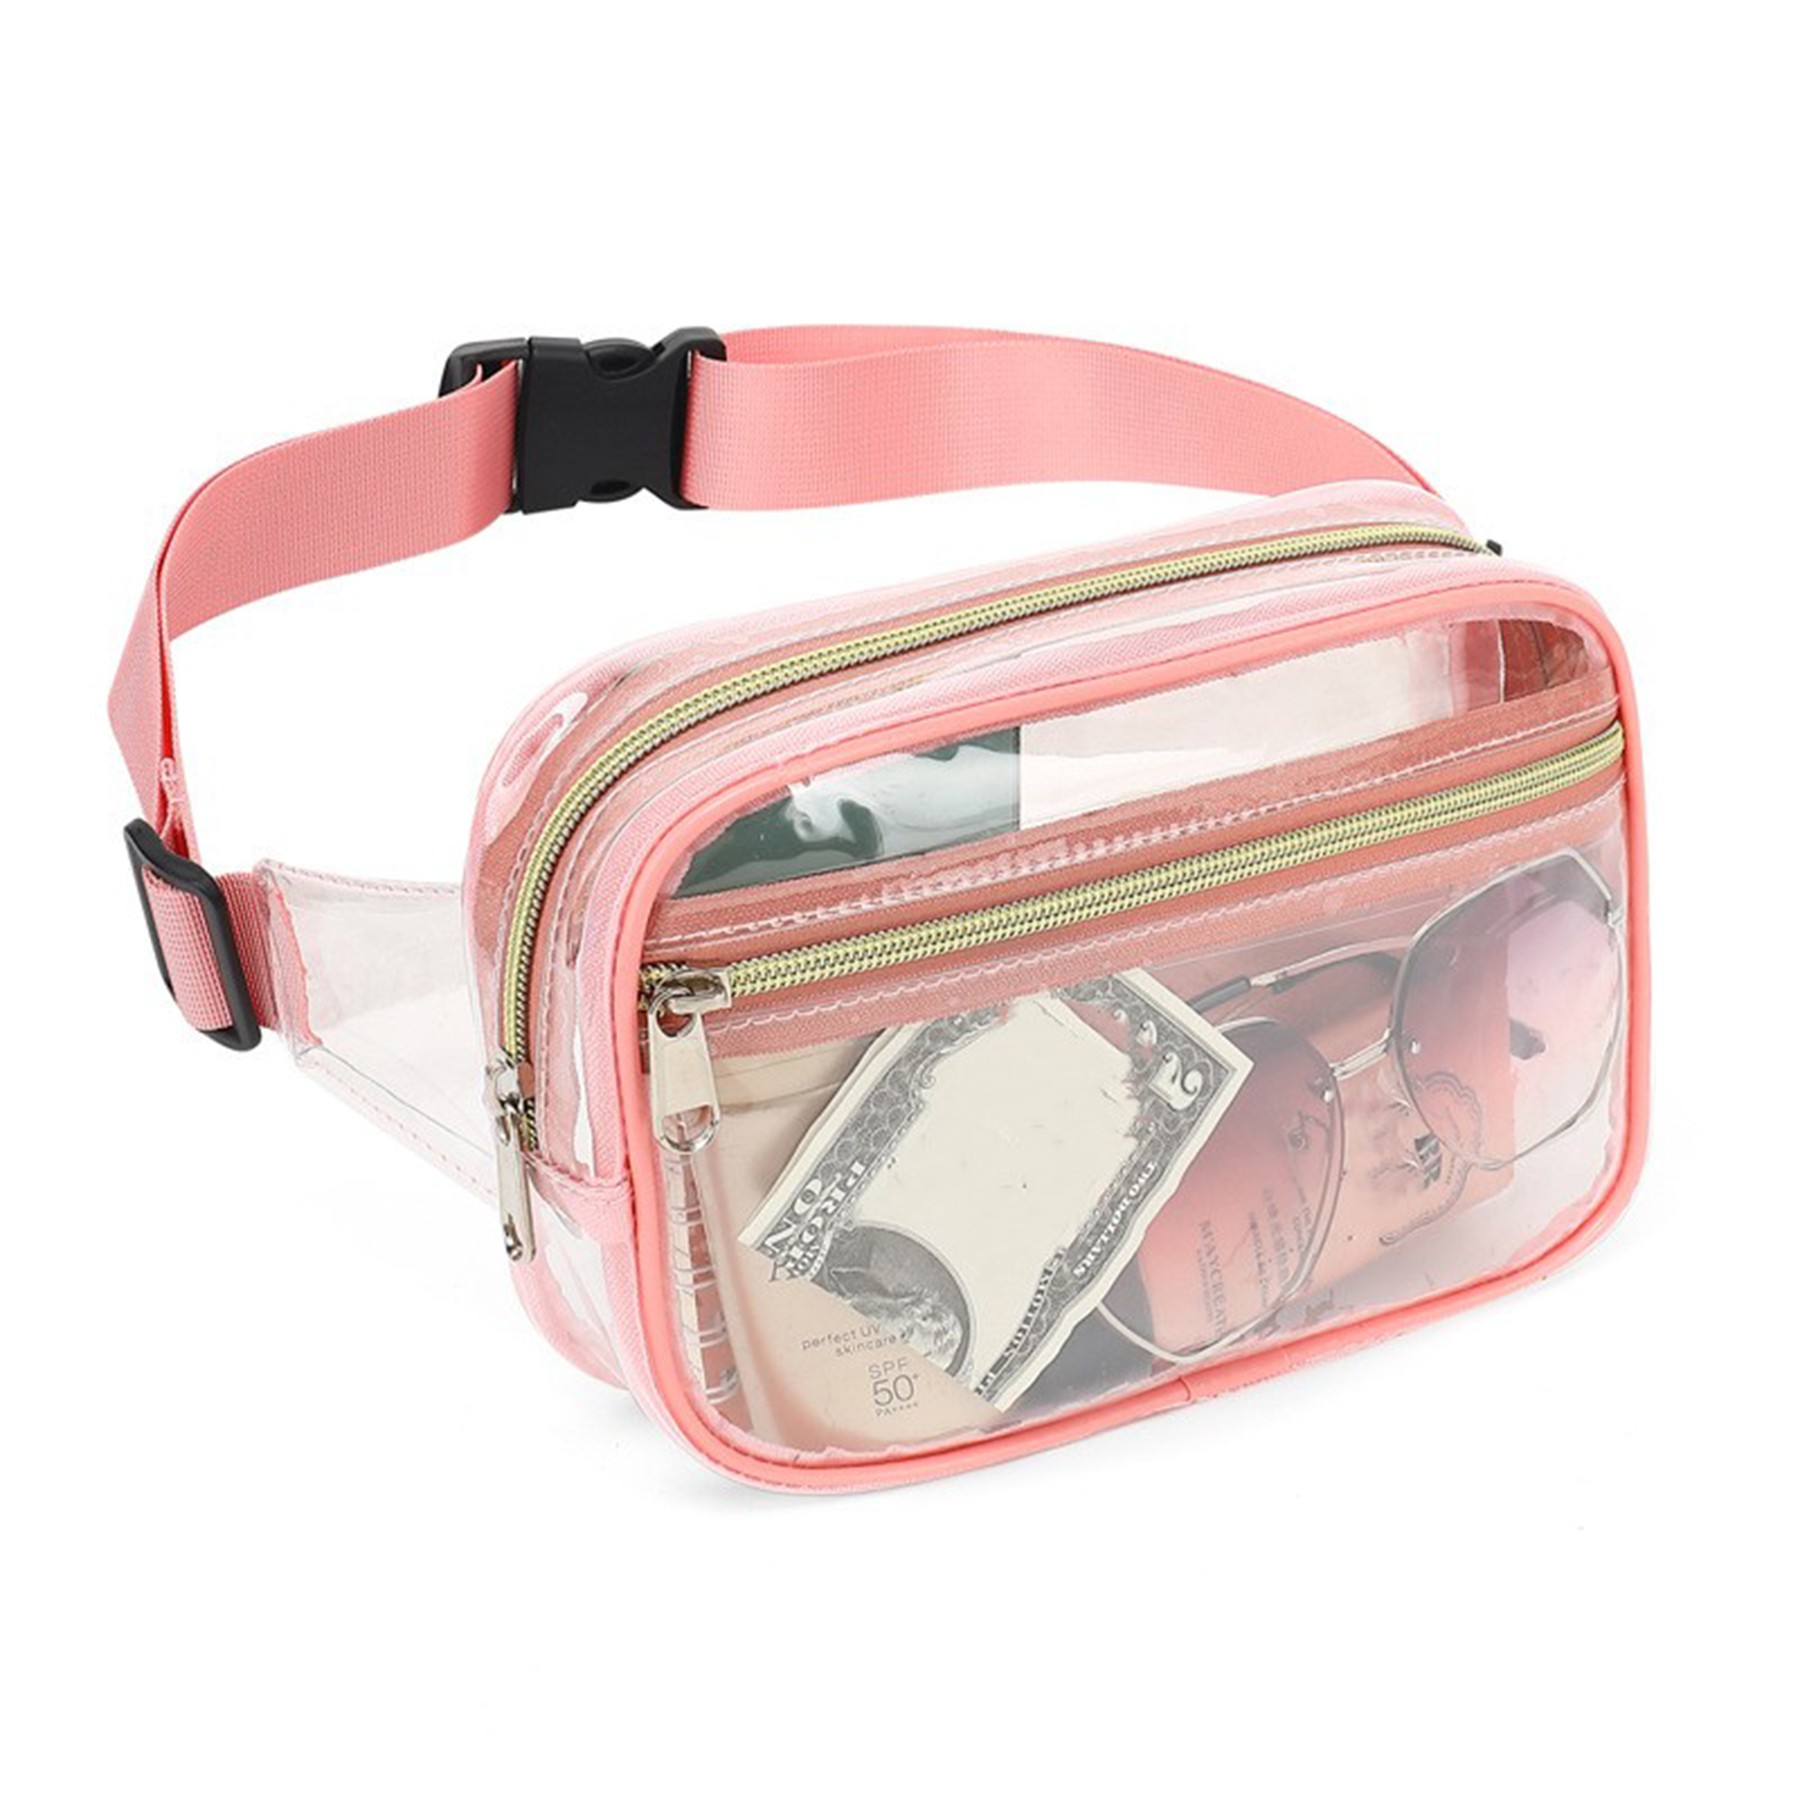 Candy White Clear Waist Jelly Bag Mirror Leather PVC Chest Fanny Pack